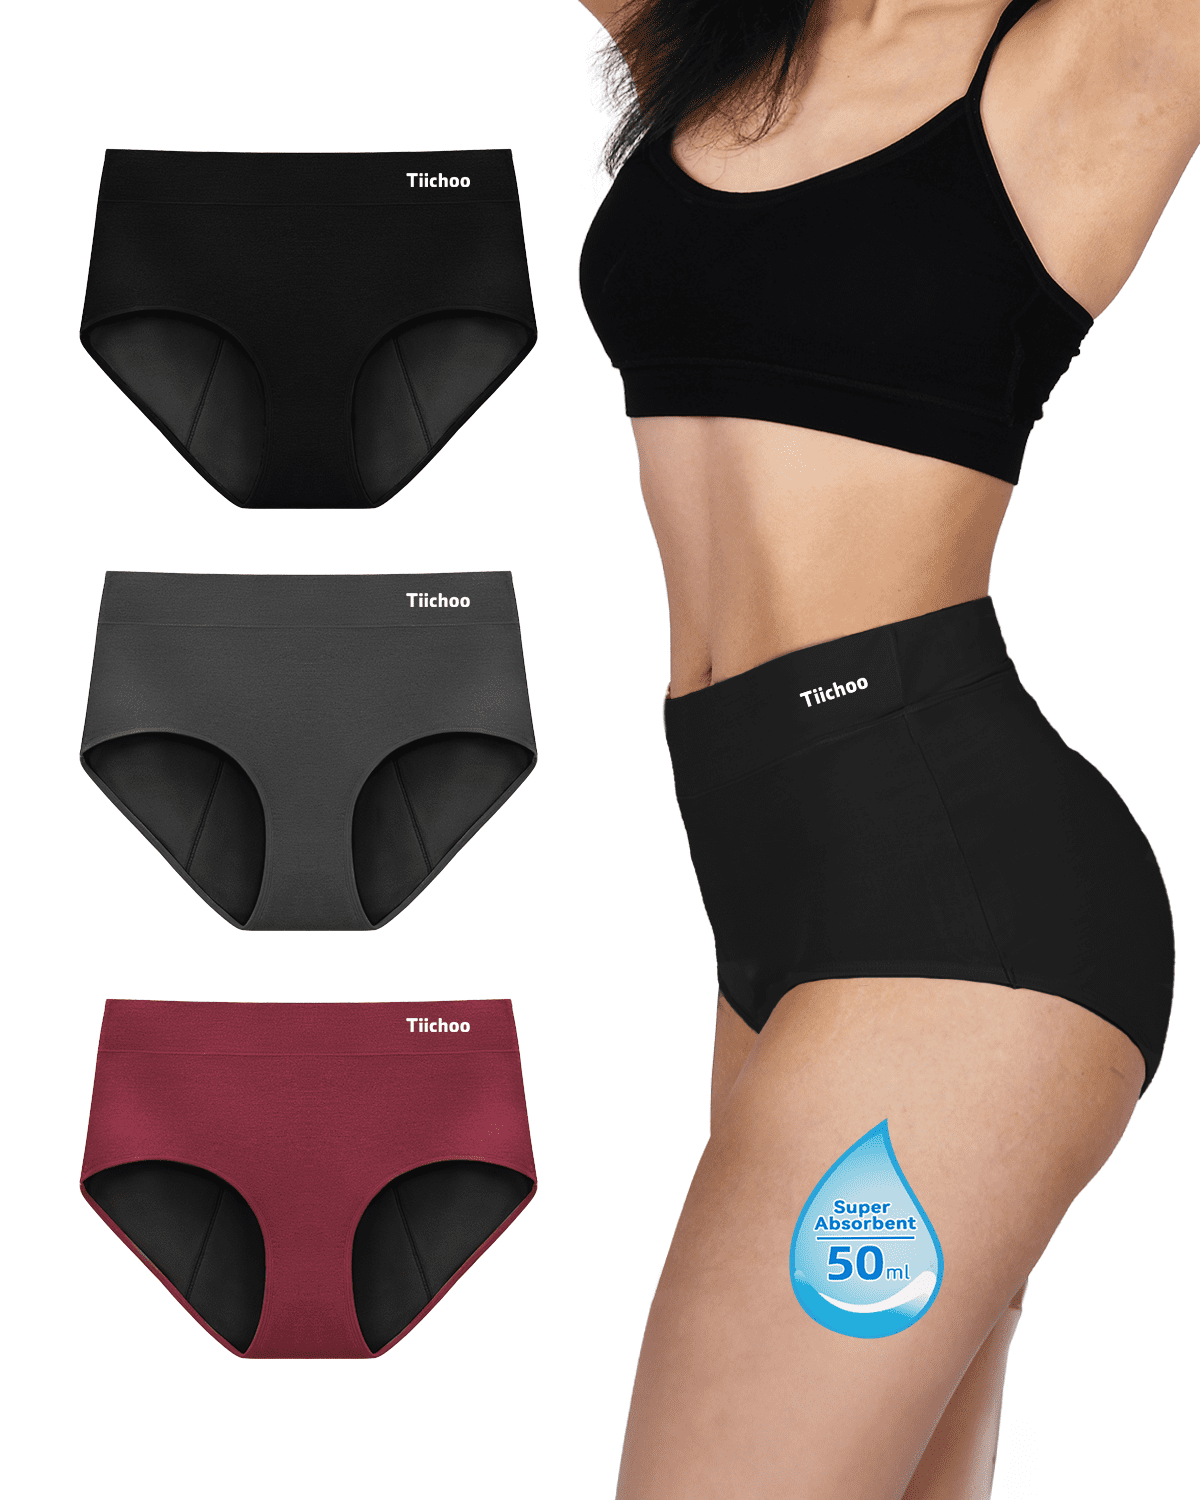  Lunam PFAS Free Period Full Brief for Women - Menstrual,  Postpartum, Maternity Soft, Breathable Underwear - 5 Tampons Eco-Friendly  Menstrual, Soft and Comfortable, Intimate Wear(Black) : Health & Household